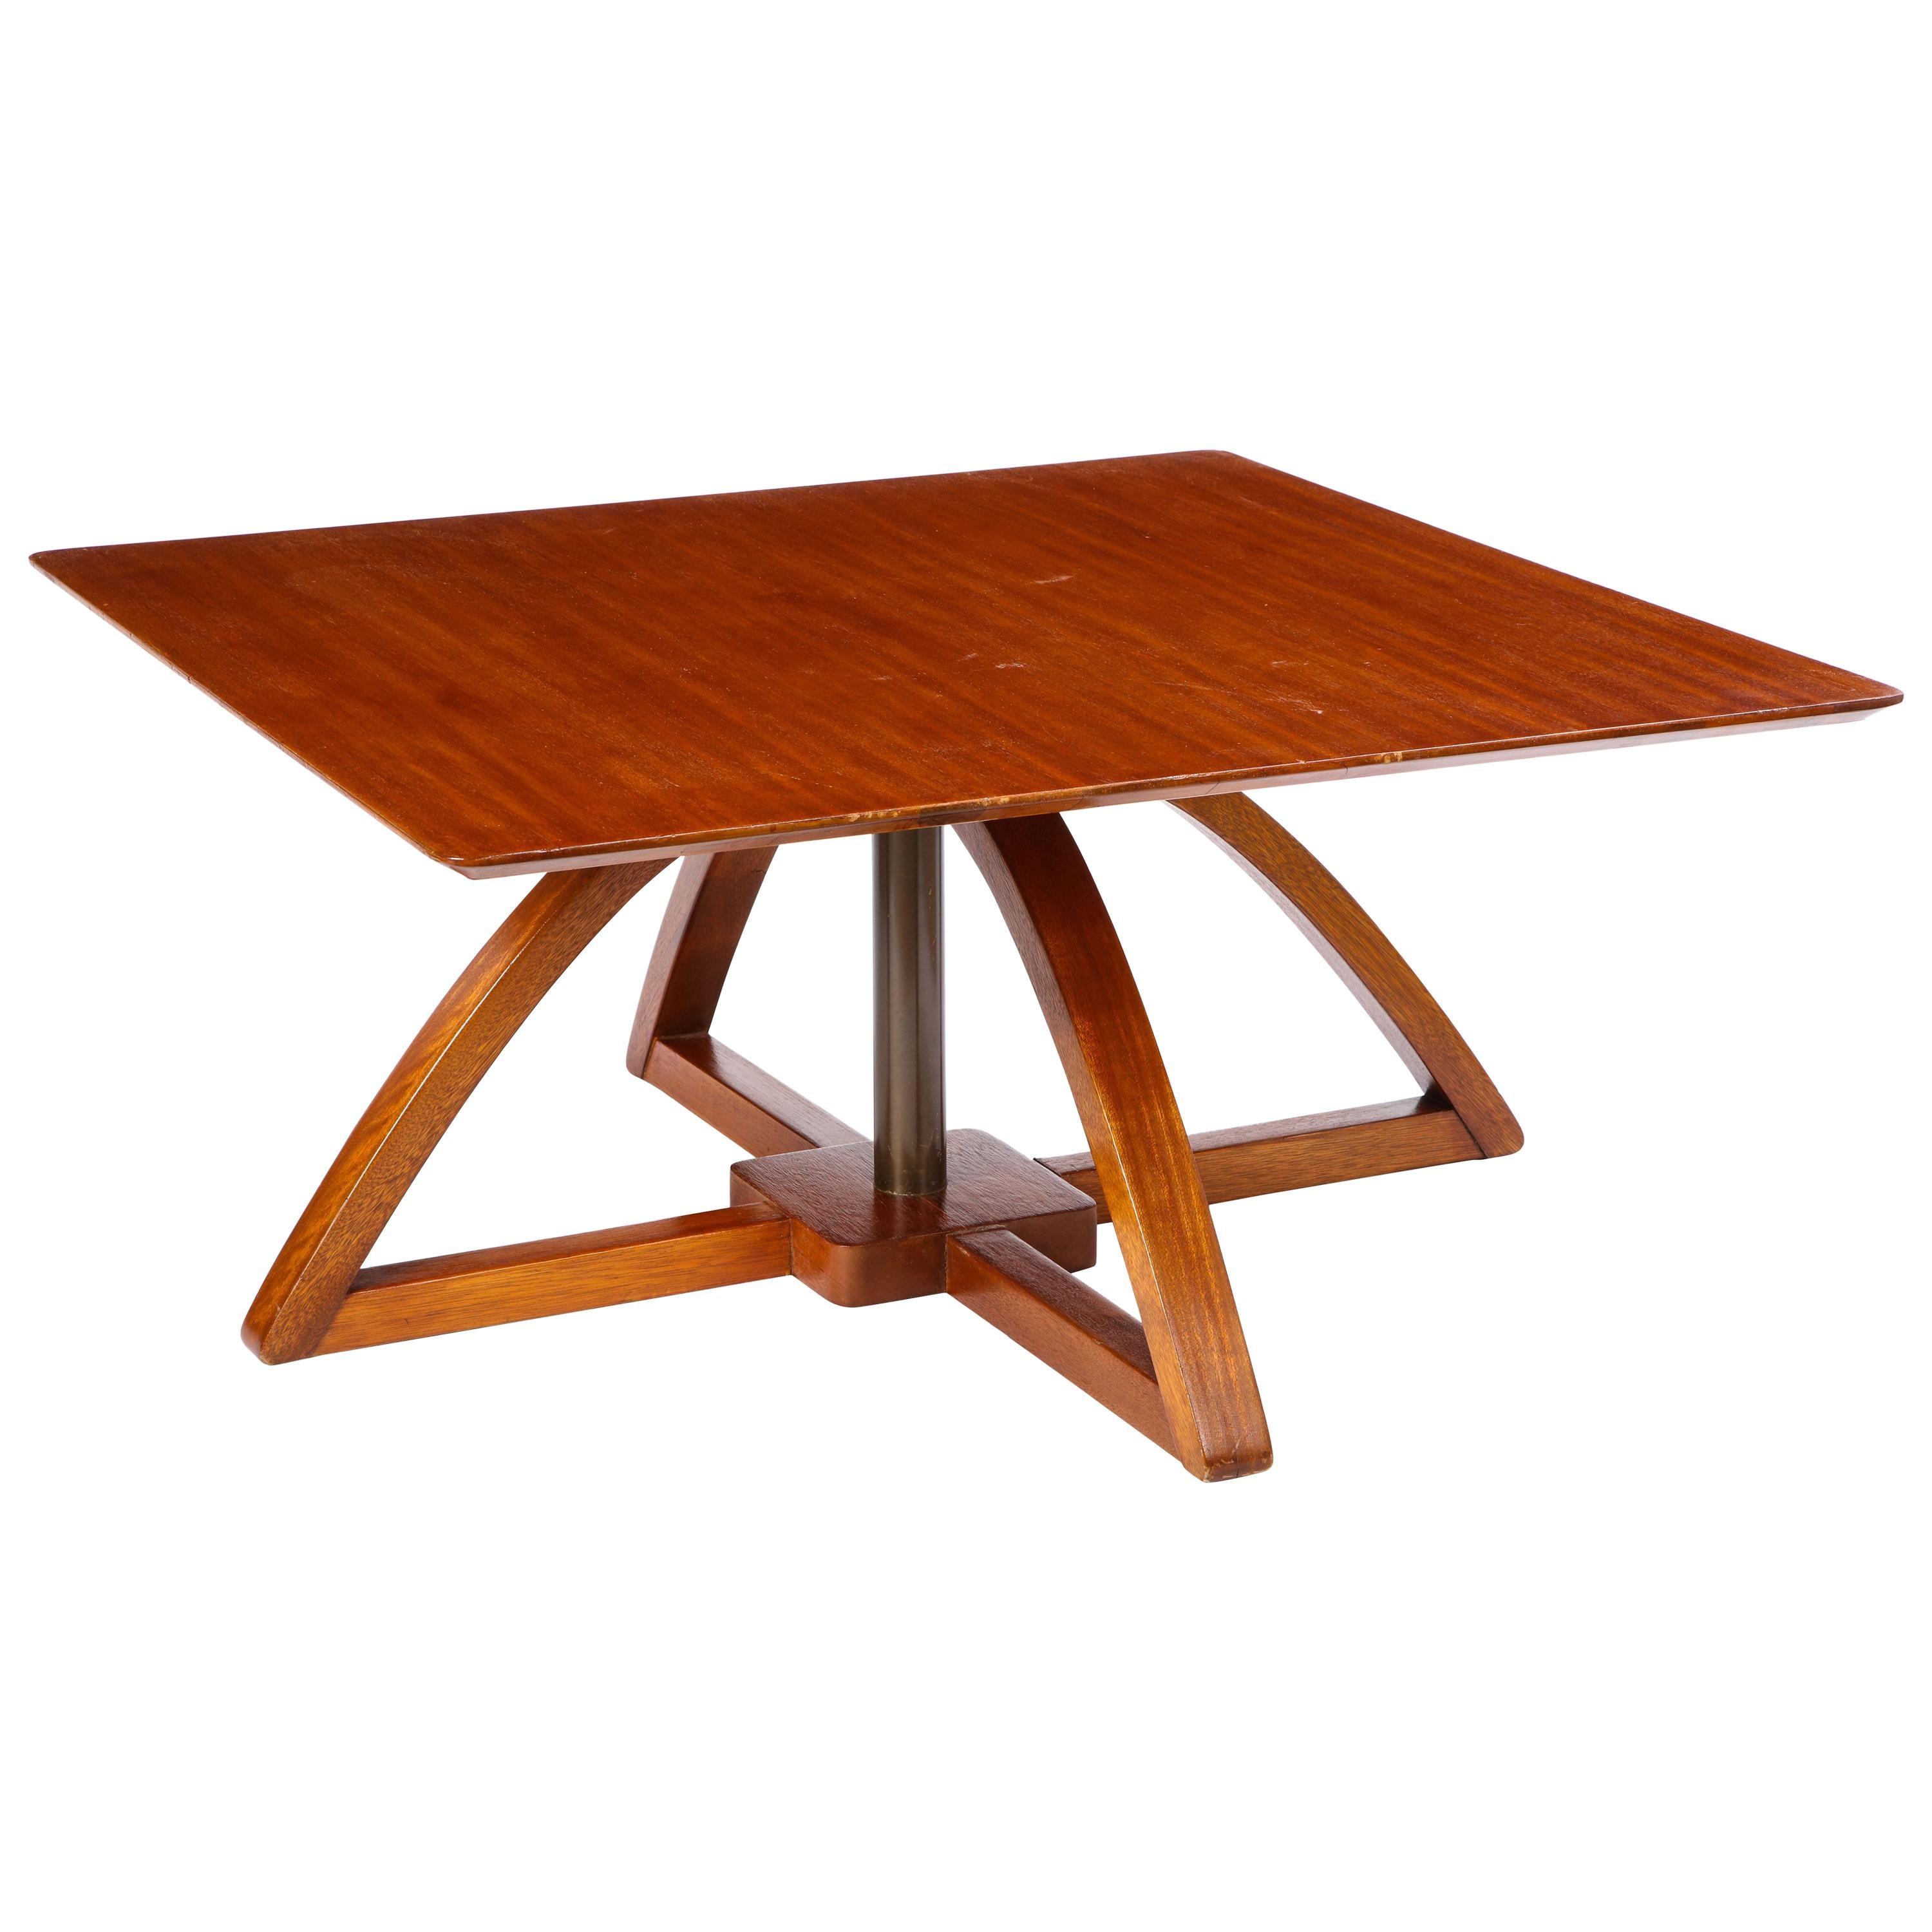 Adjustable Mahogany Square Low Table, Modern